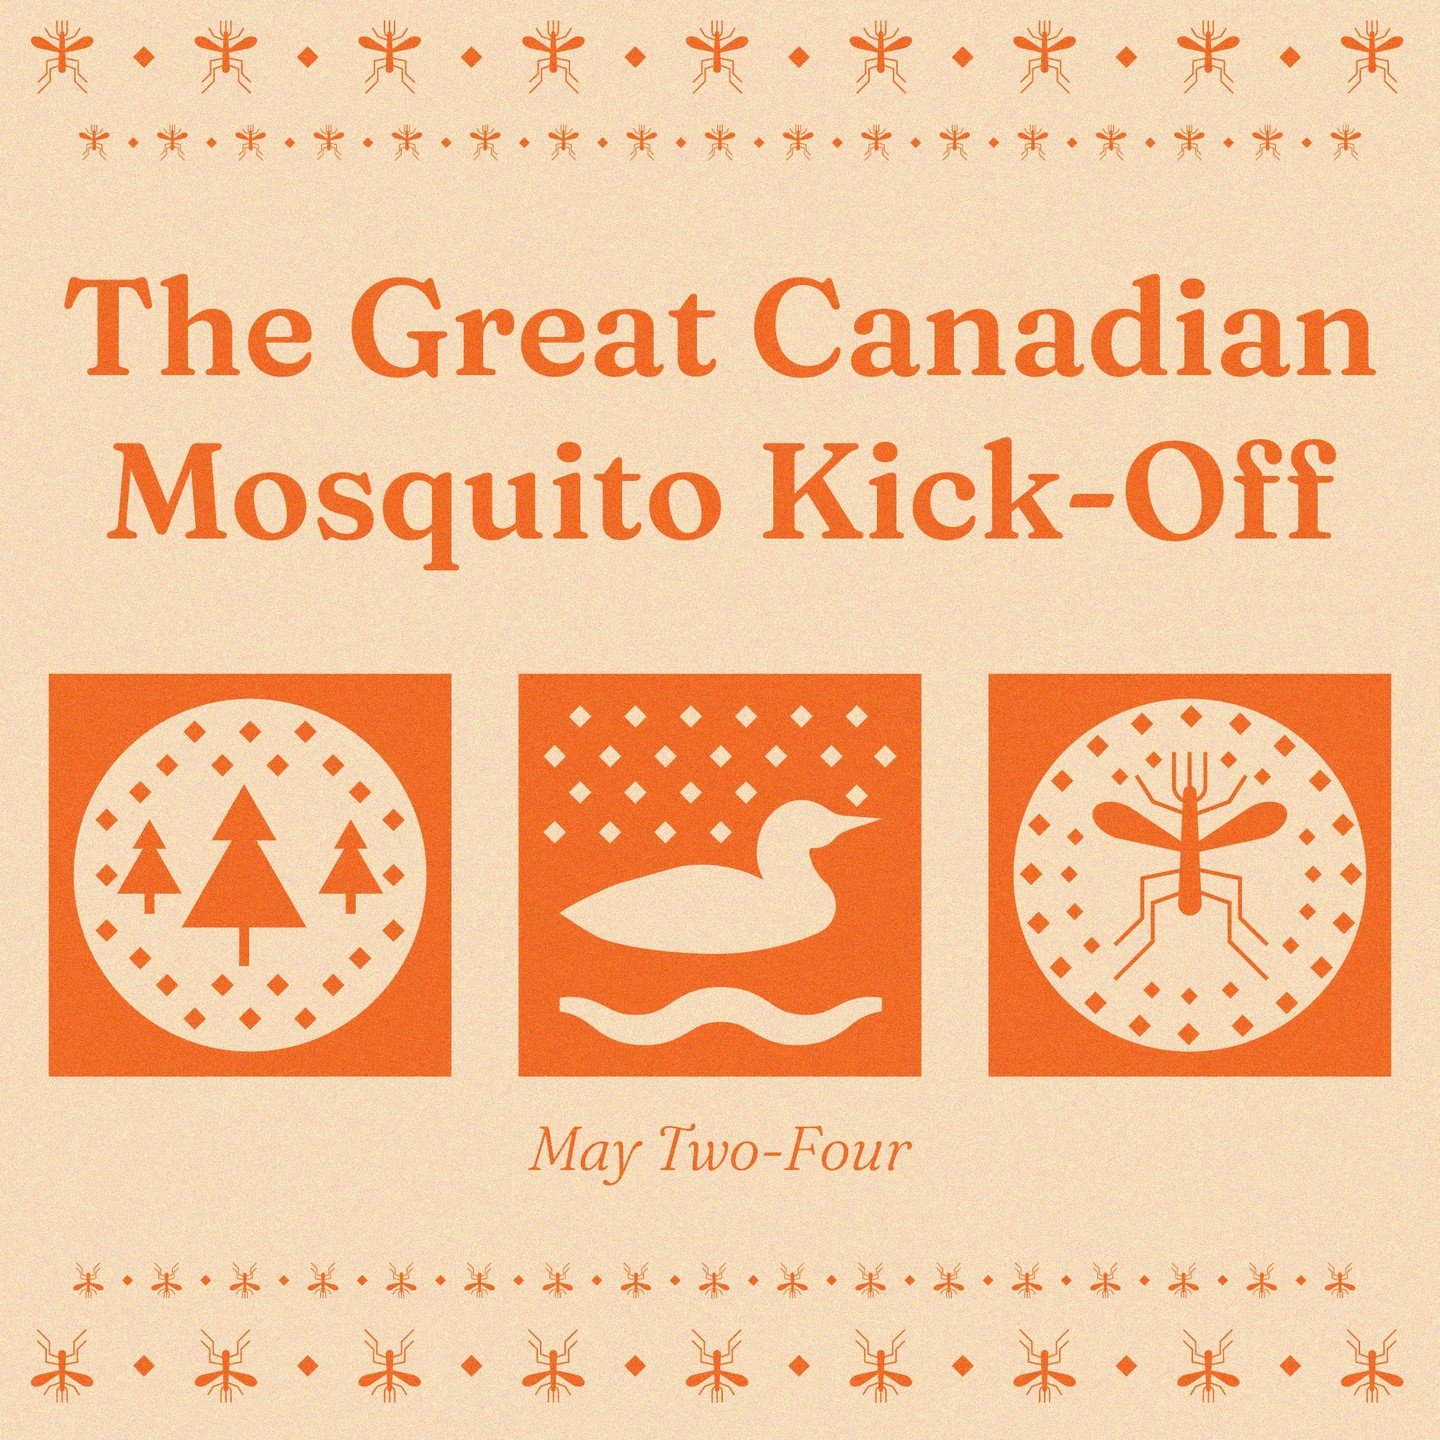 I have a couple mosquito bites already, but now it's time to make it official. 

I'm having a pretty easy weekend - no cottage for me. I'll be going to Lion's Head tomorrow with my man and my dog for a big hike, then kicking it back the rest of the w